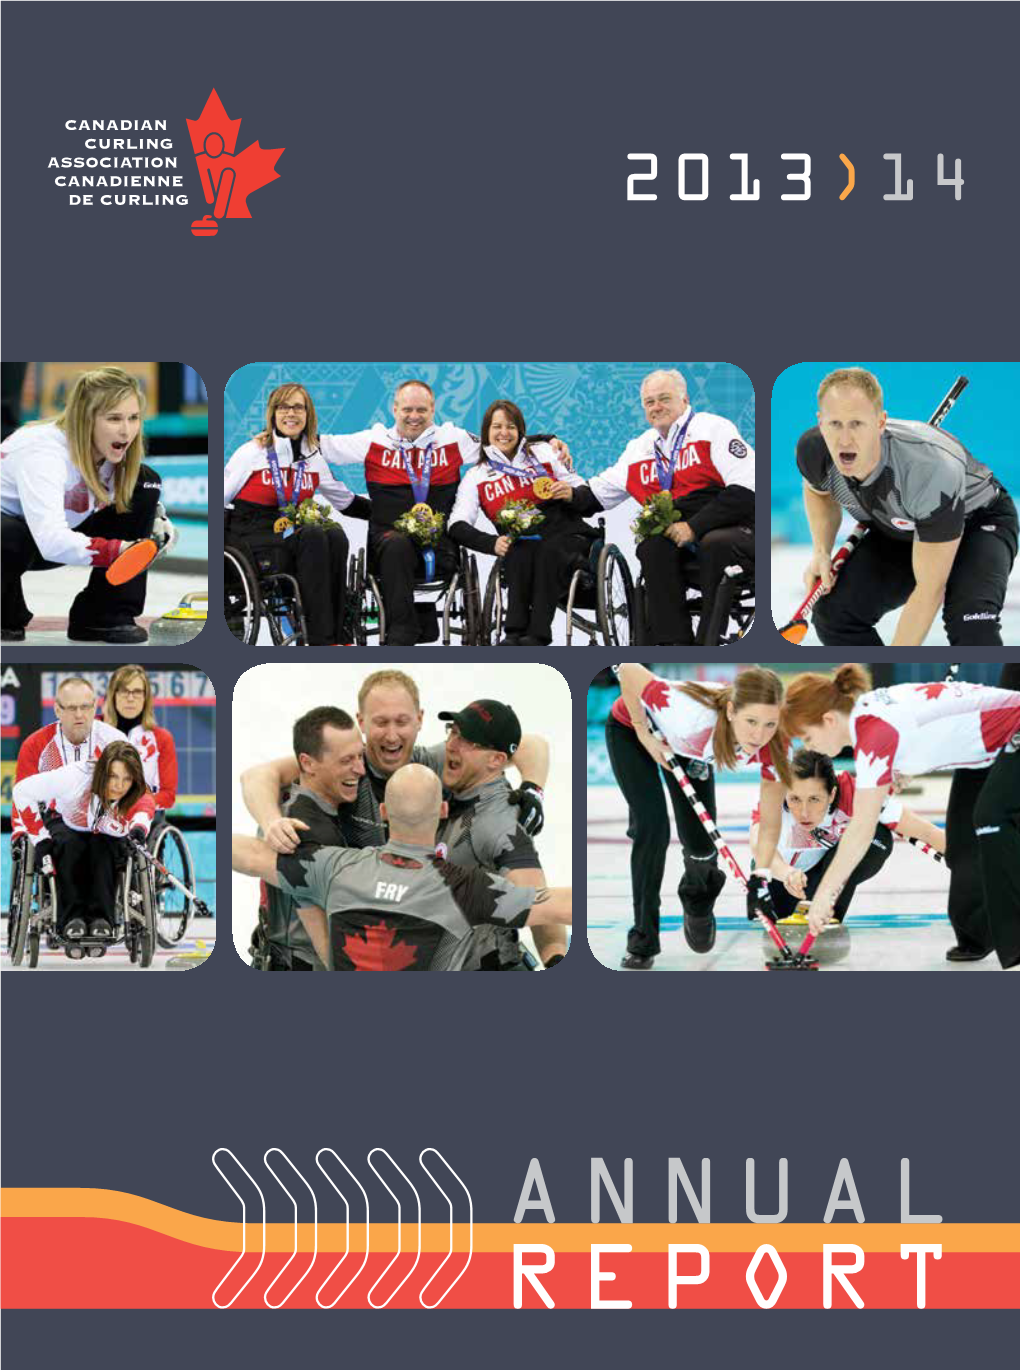 ANNUAL REPORT Mission to Encourage and Facilitate the Growth and Development of Curling in Co-Operation with Our Network of Aﬃ Liates